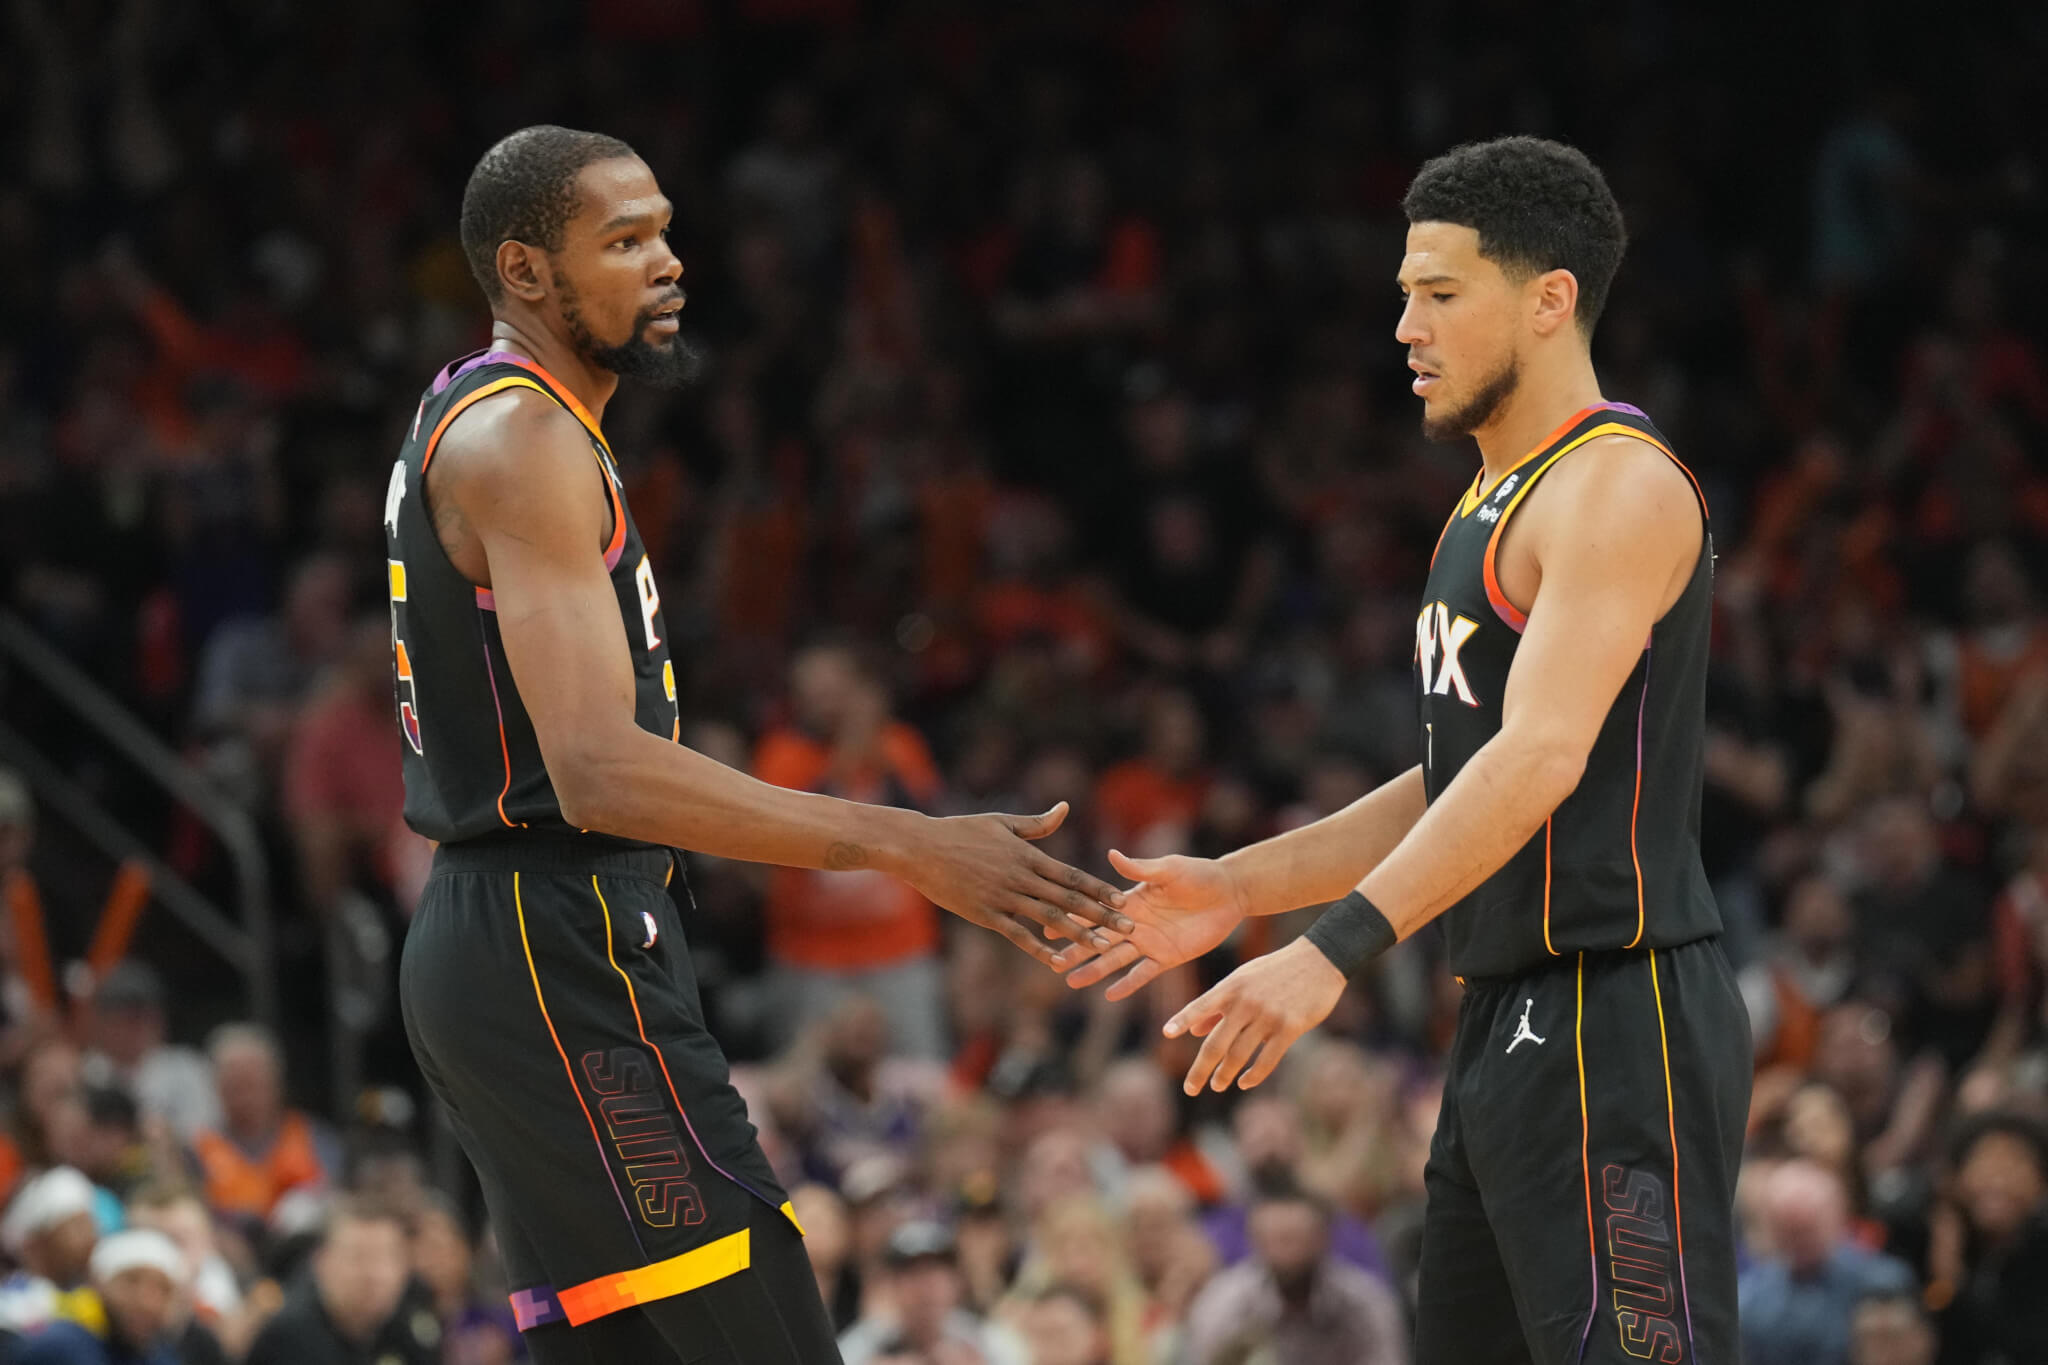 Kevin Durant and Devin Booker slapping hands